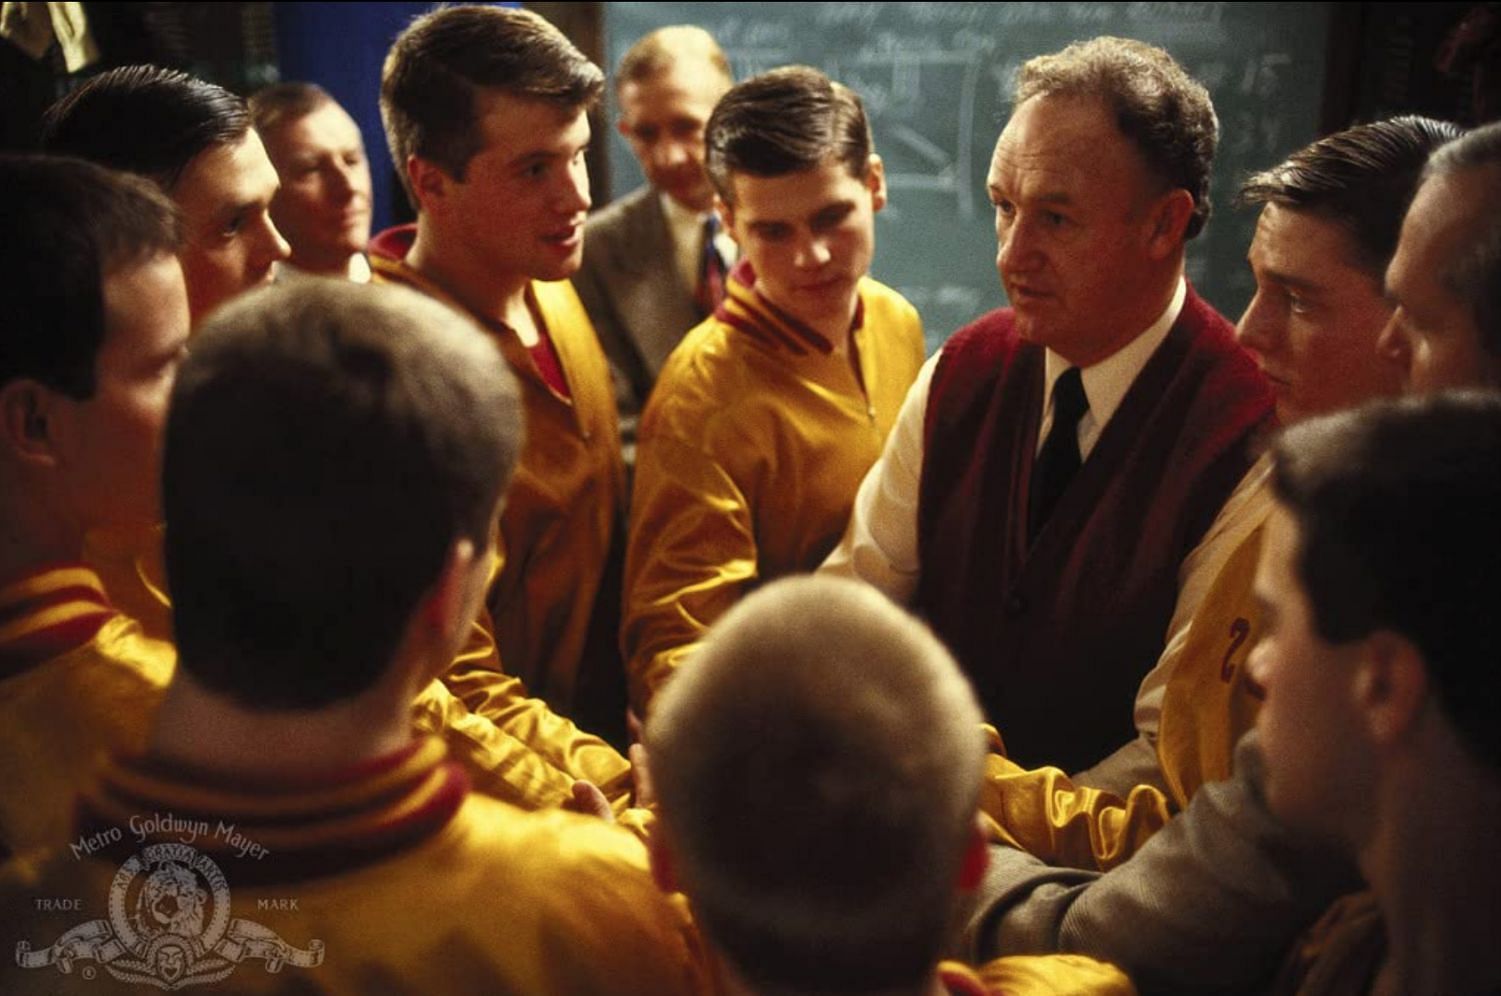 Norman Dale with his team from Hickory, Indiana (Image via Metro Goldwyn Mayer)